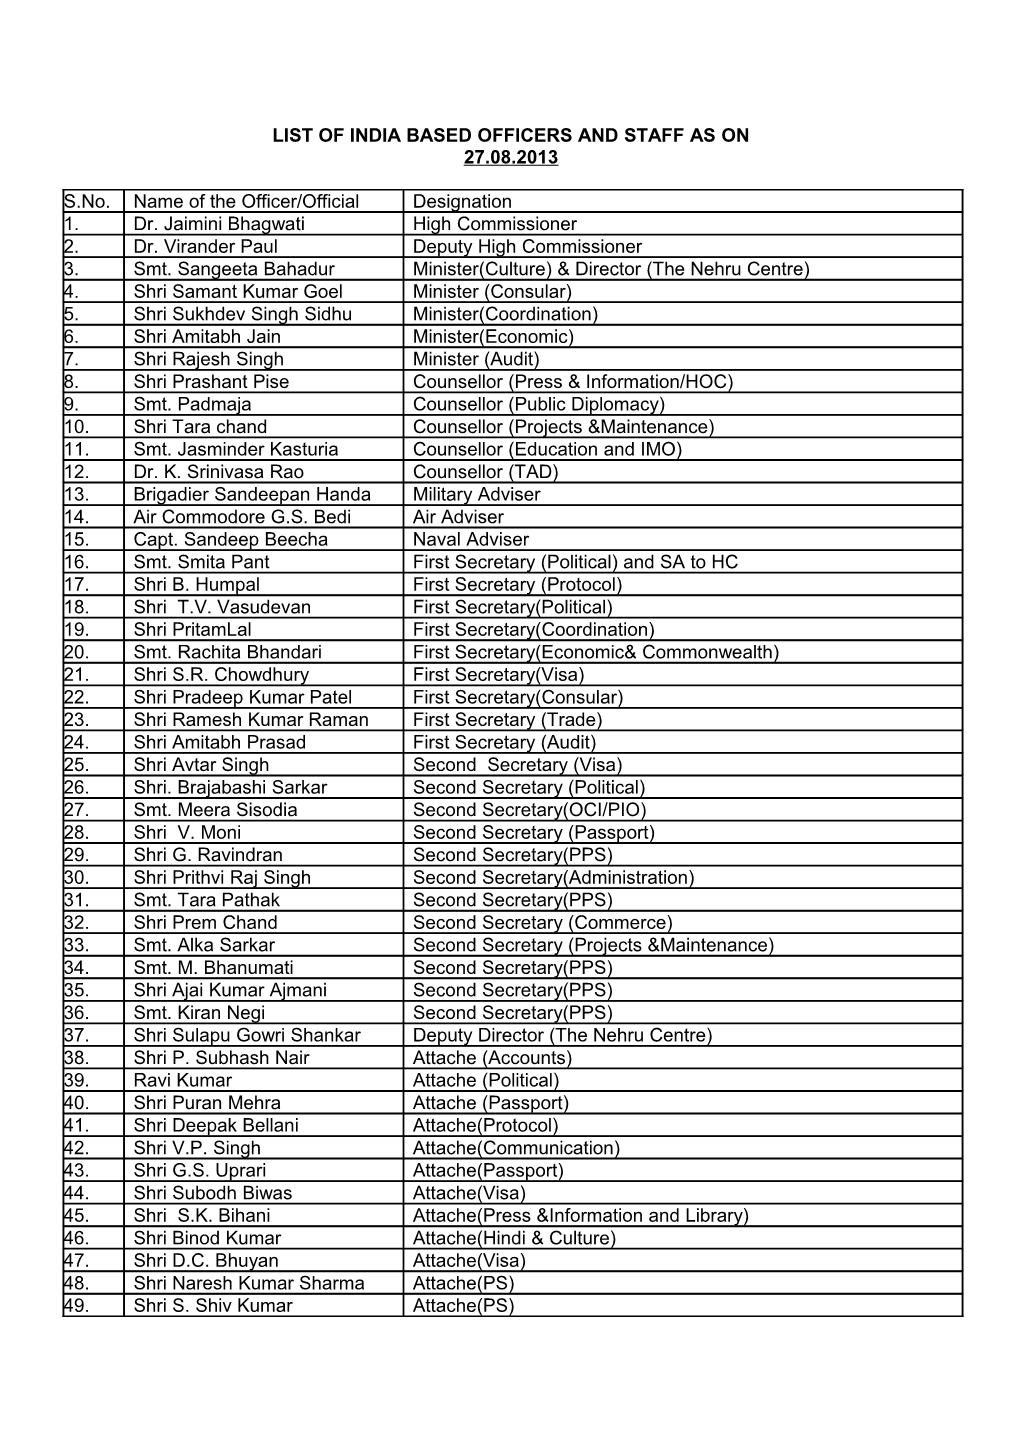 List of India Based Officers and Staff As On